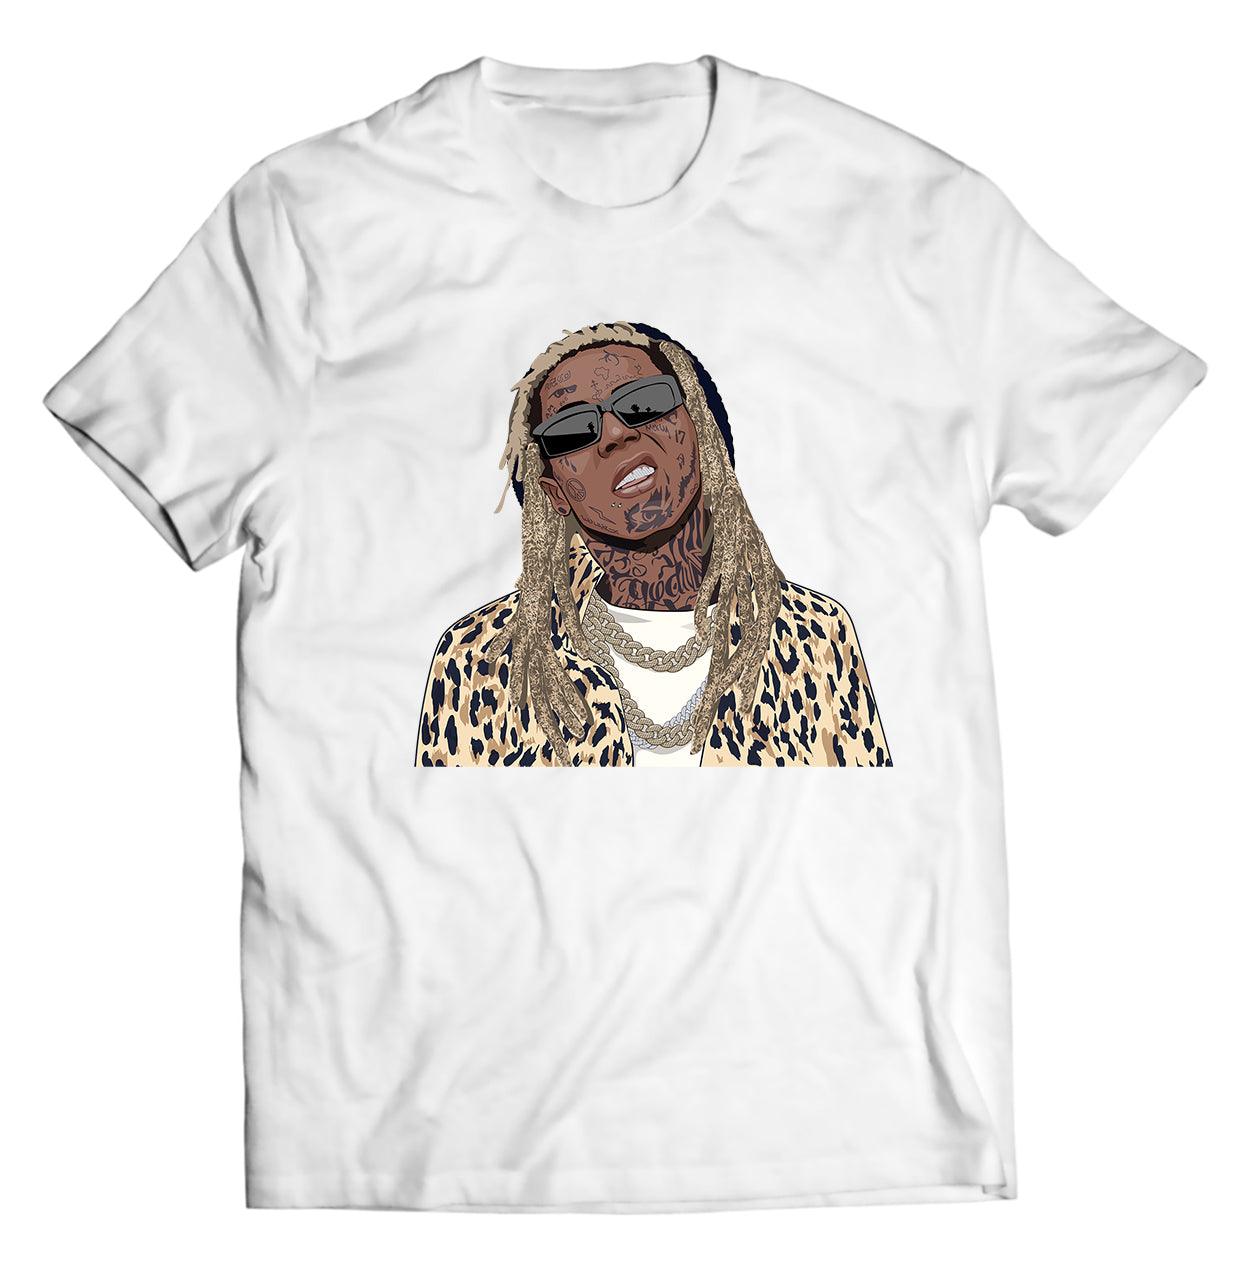 Wayne Shirt - Direct To Garment Quality Print - Unisex Shirt - Gift For Him or Her